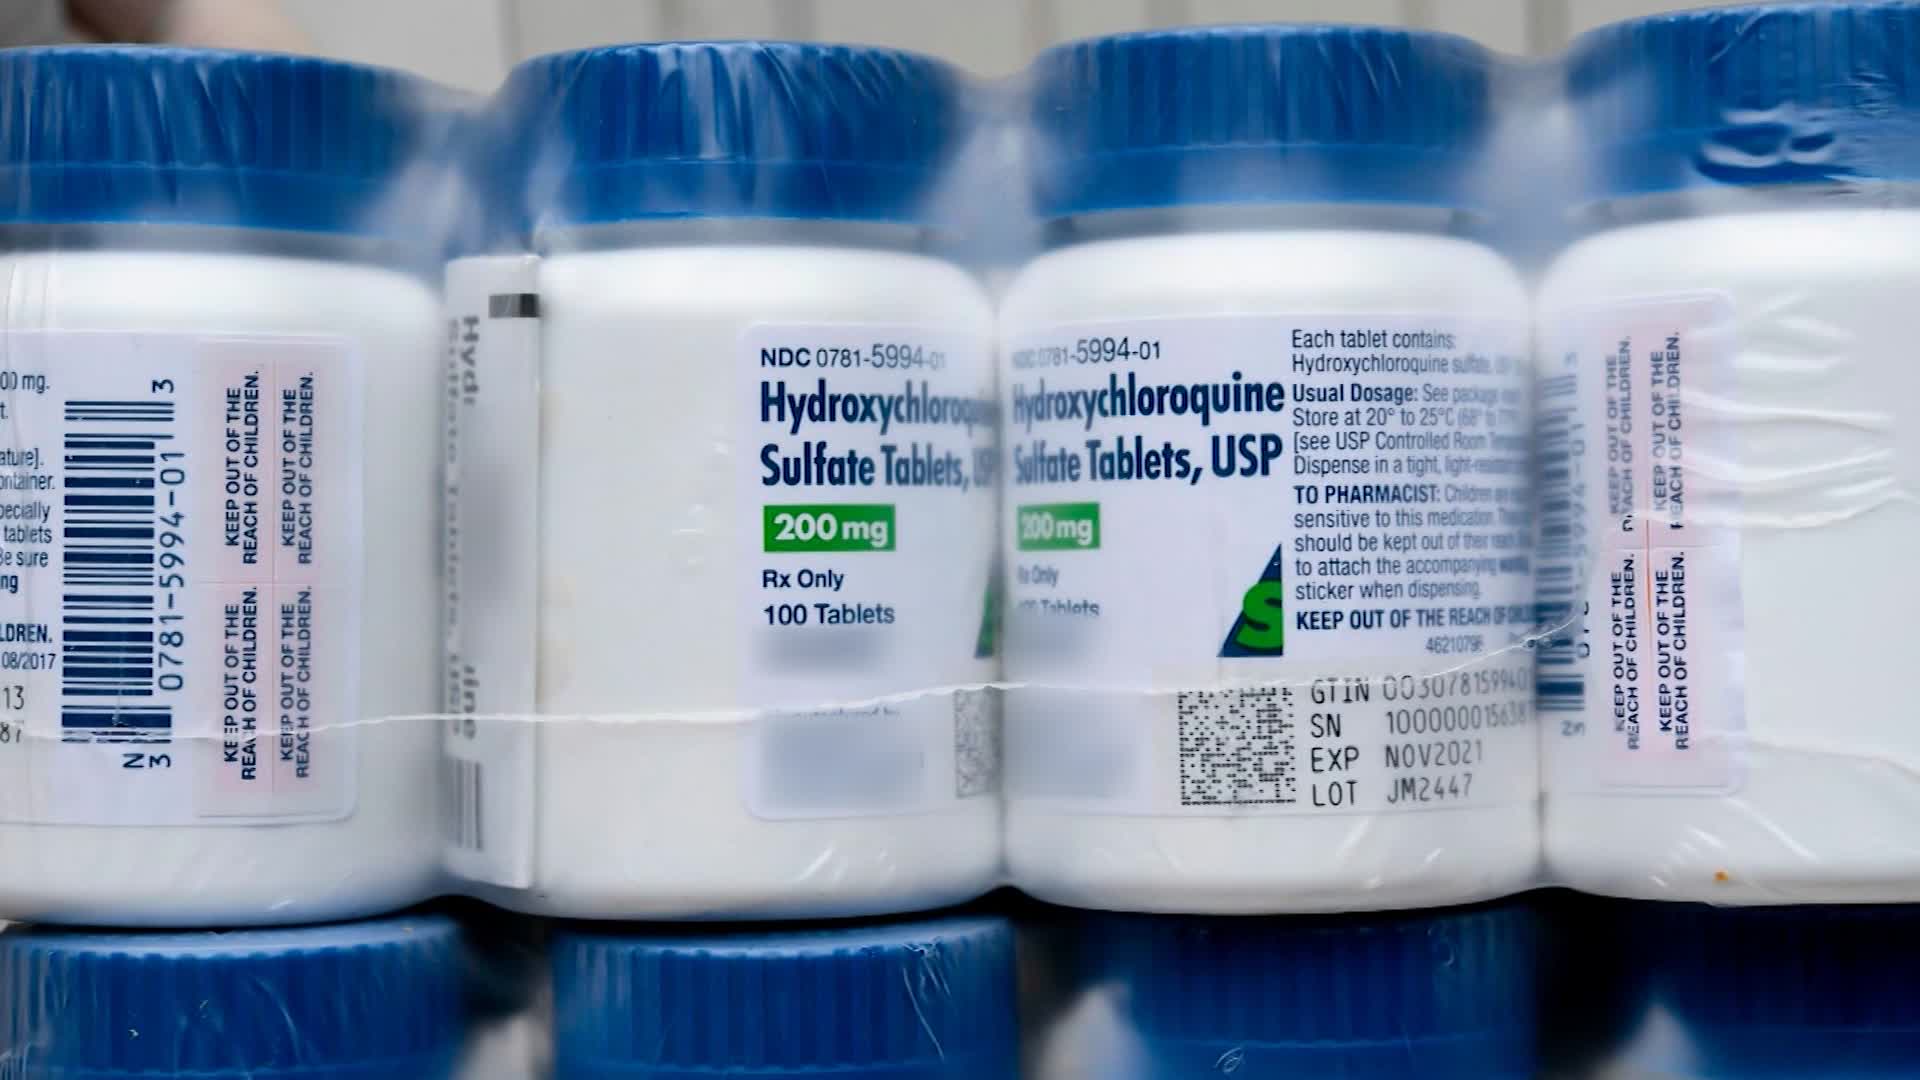 A Salvadoran Health Ministry worker shows a package of bottles of HydroxyChloroquine pills to be distributed in hospitals in San Salvador on April 21 amid the coronavirus outbreak.